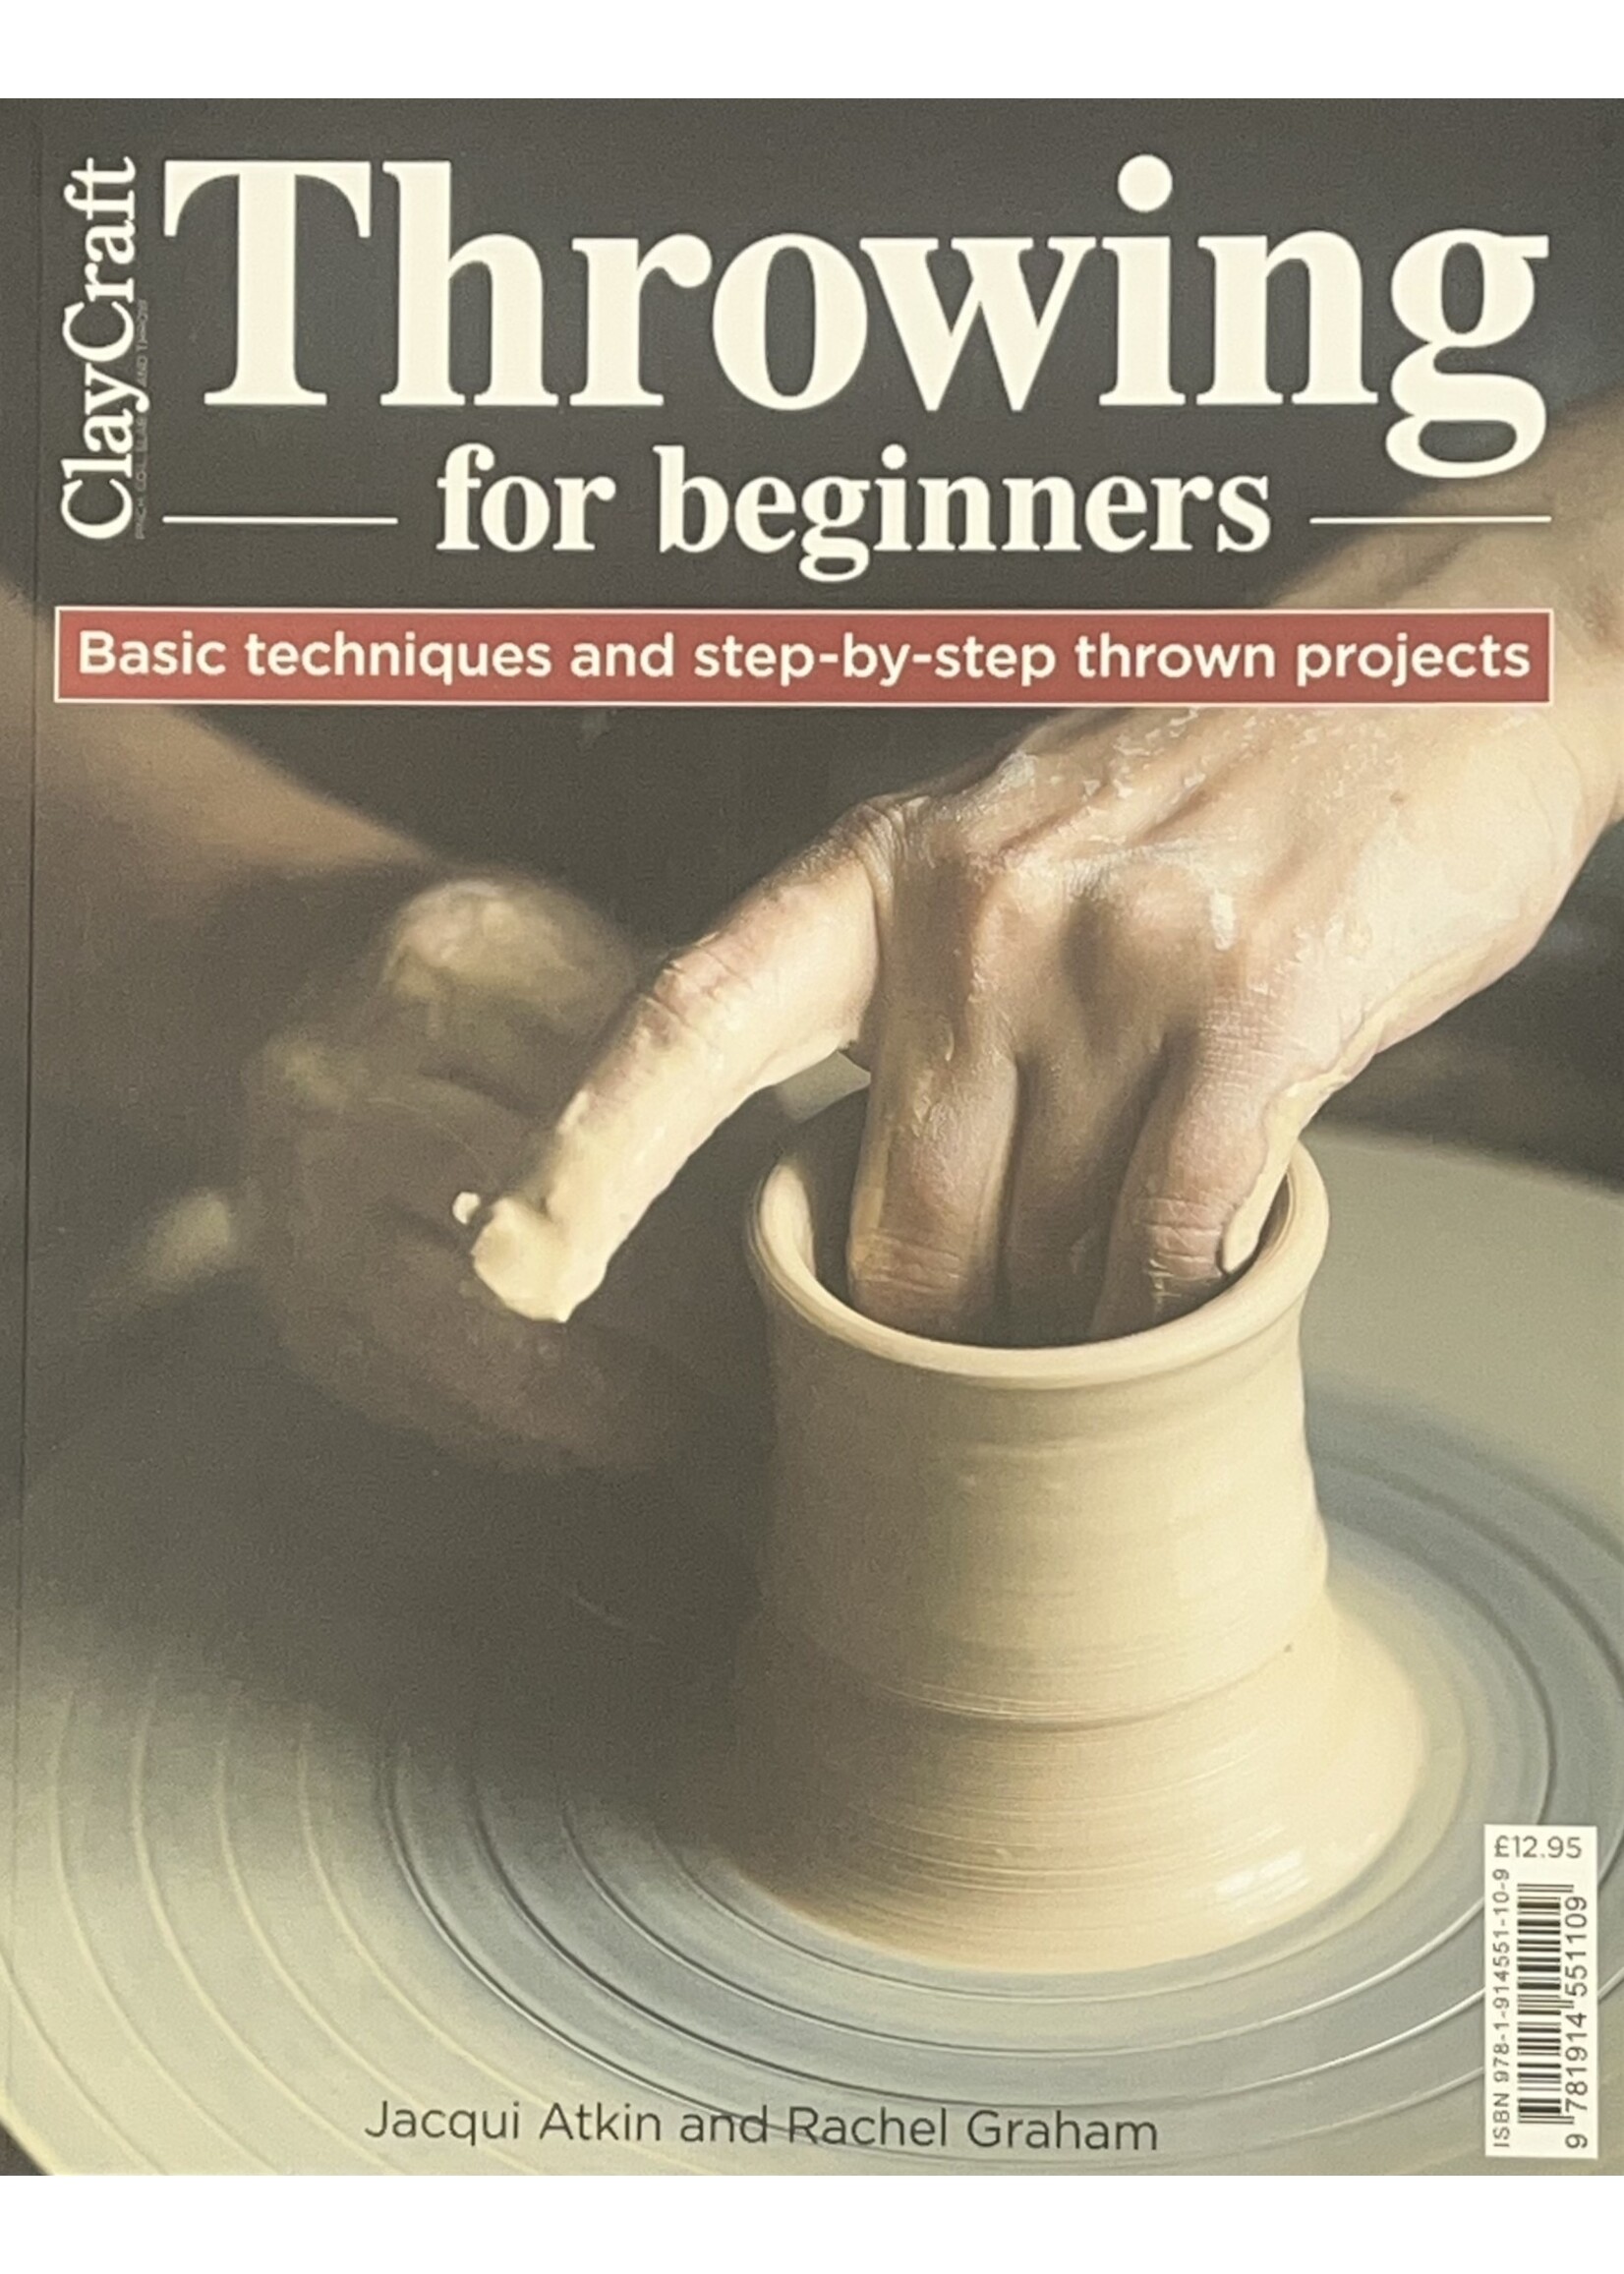 Throwing for Beginners